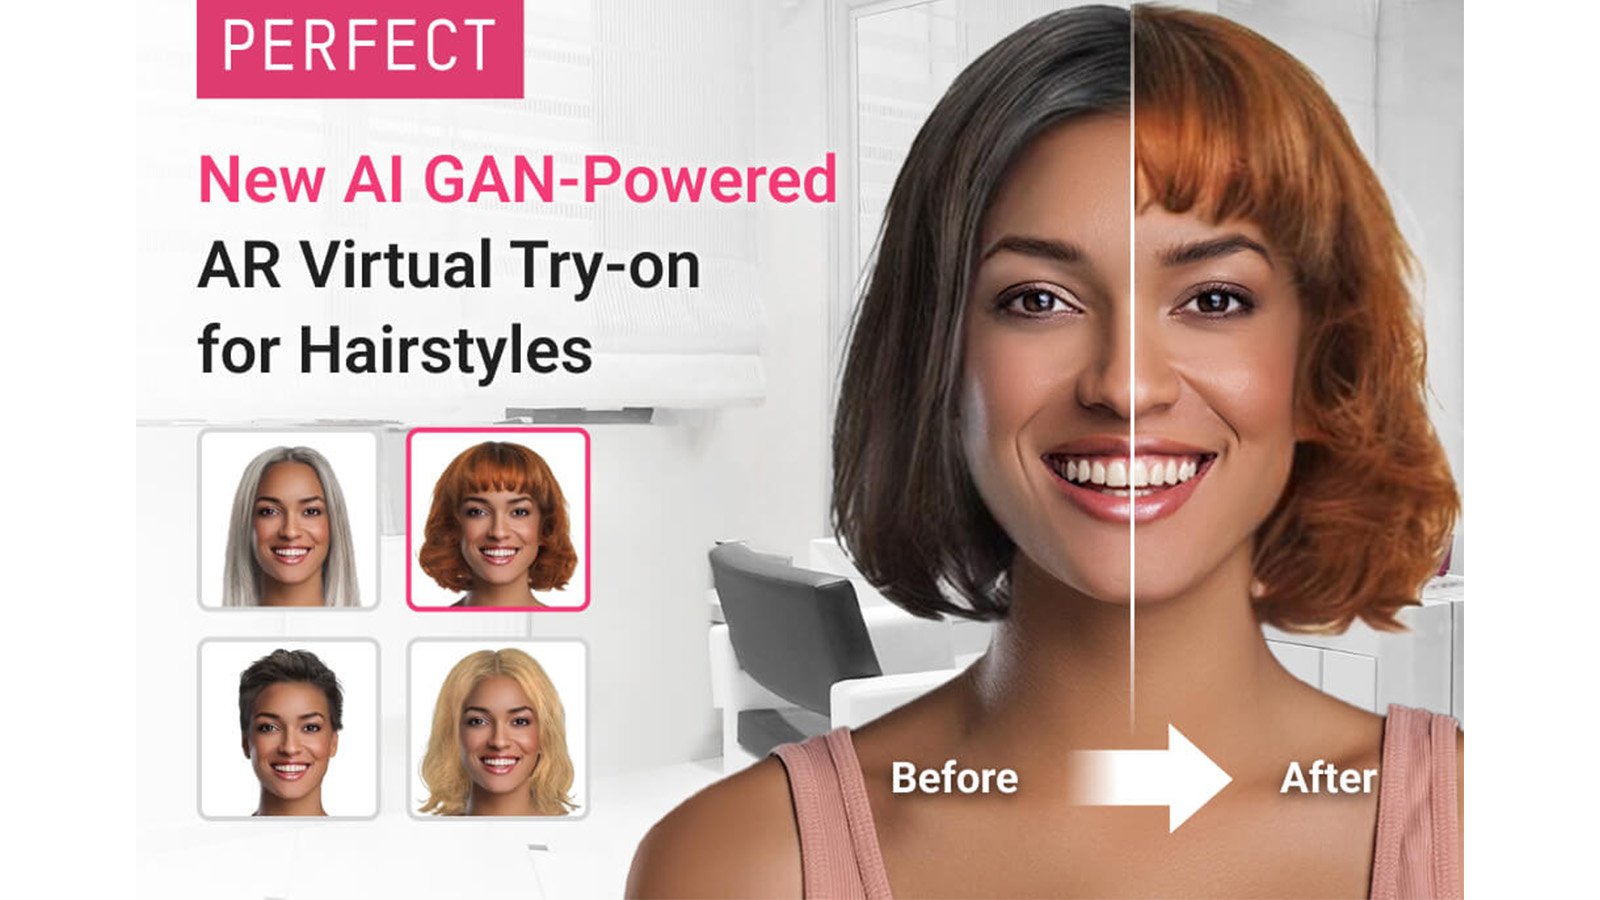 The Influence Of Haircuts On Your Overall Image - Stylish.ae Insights